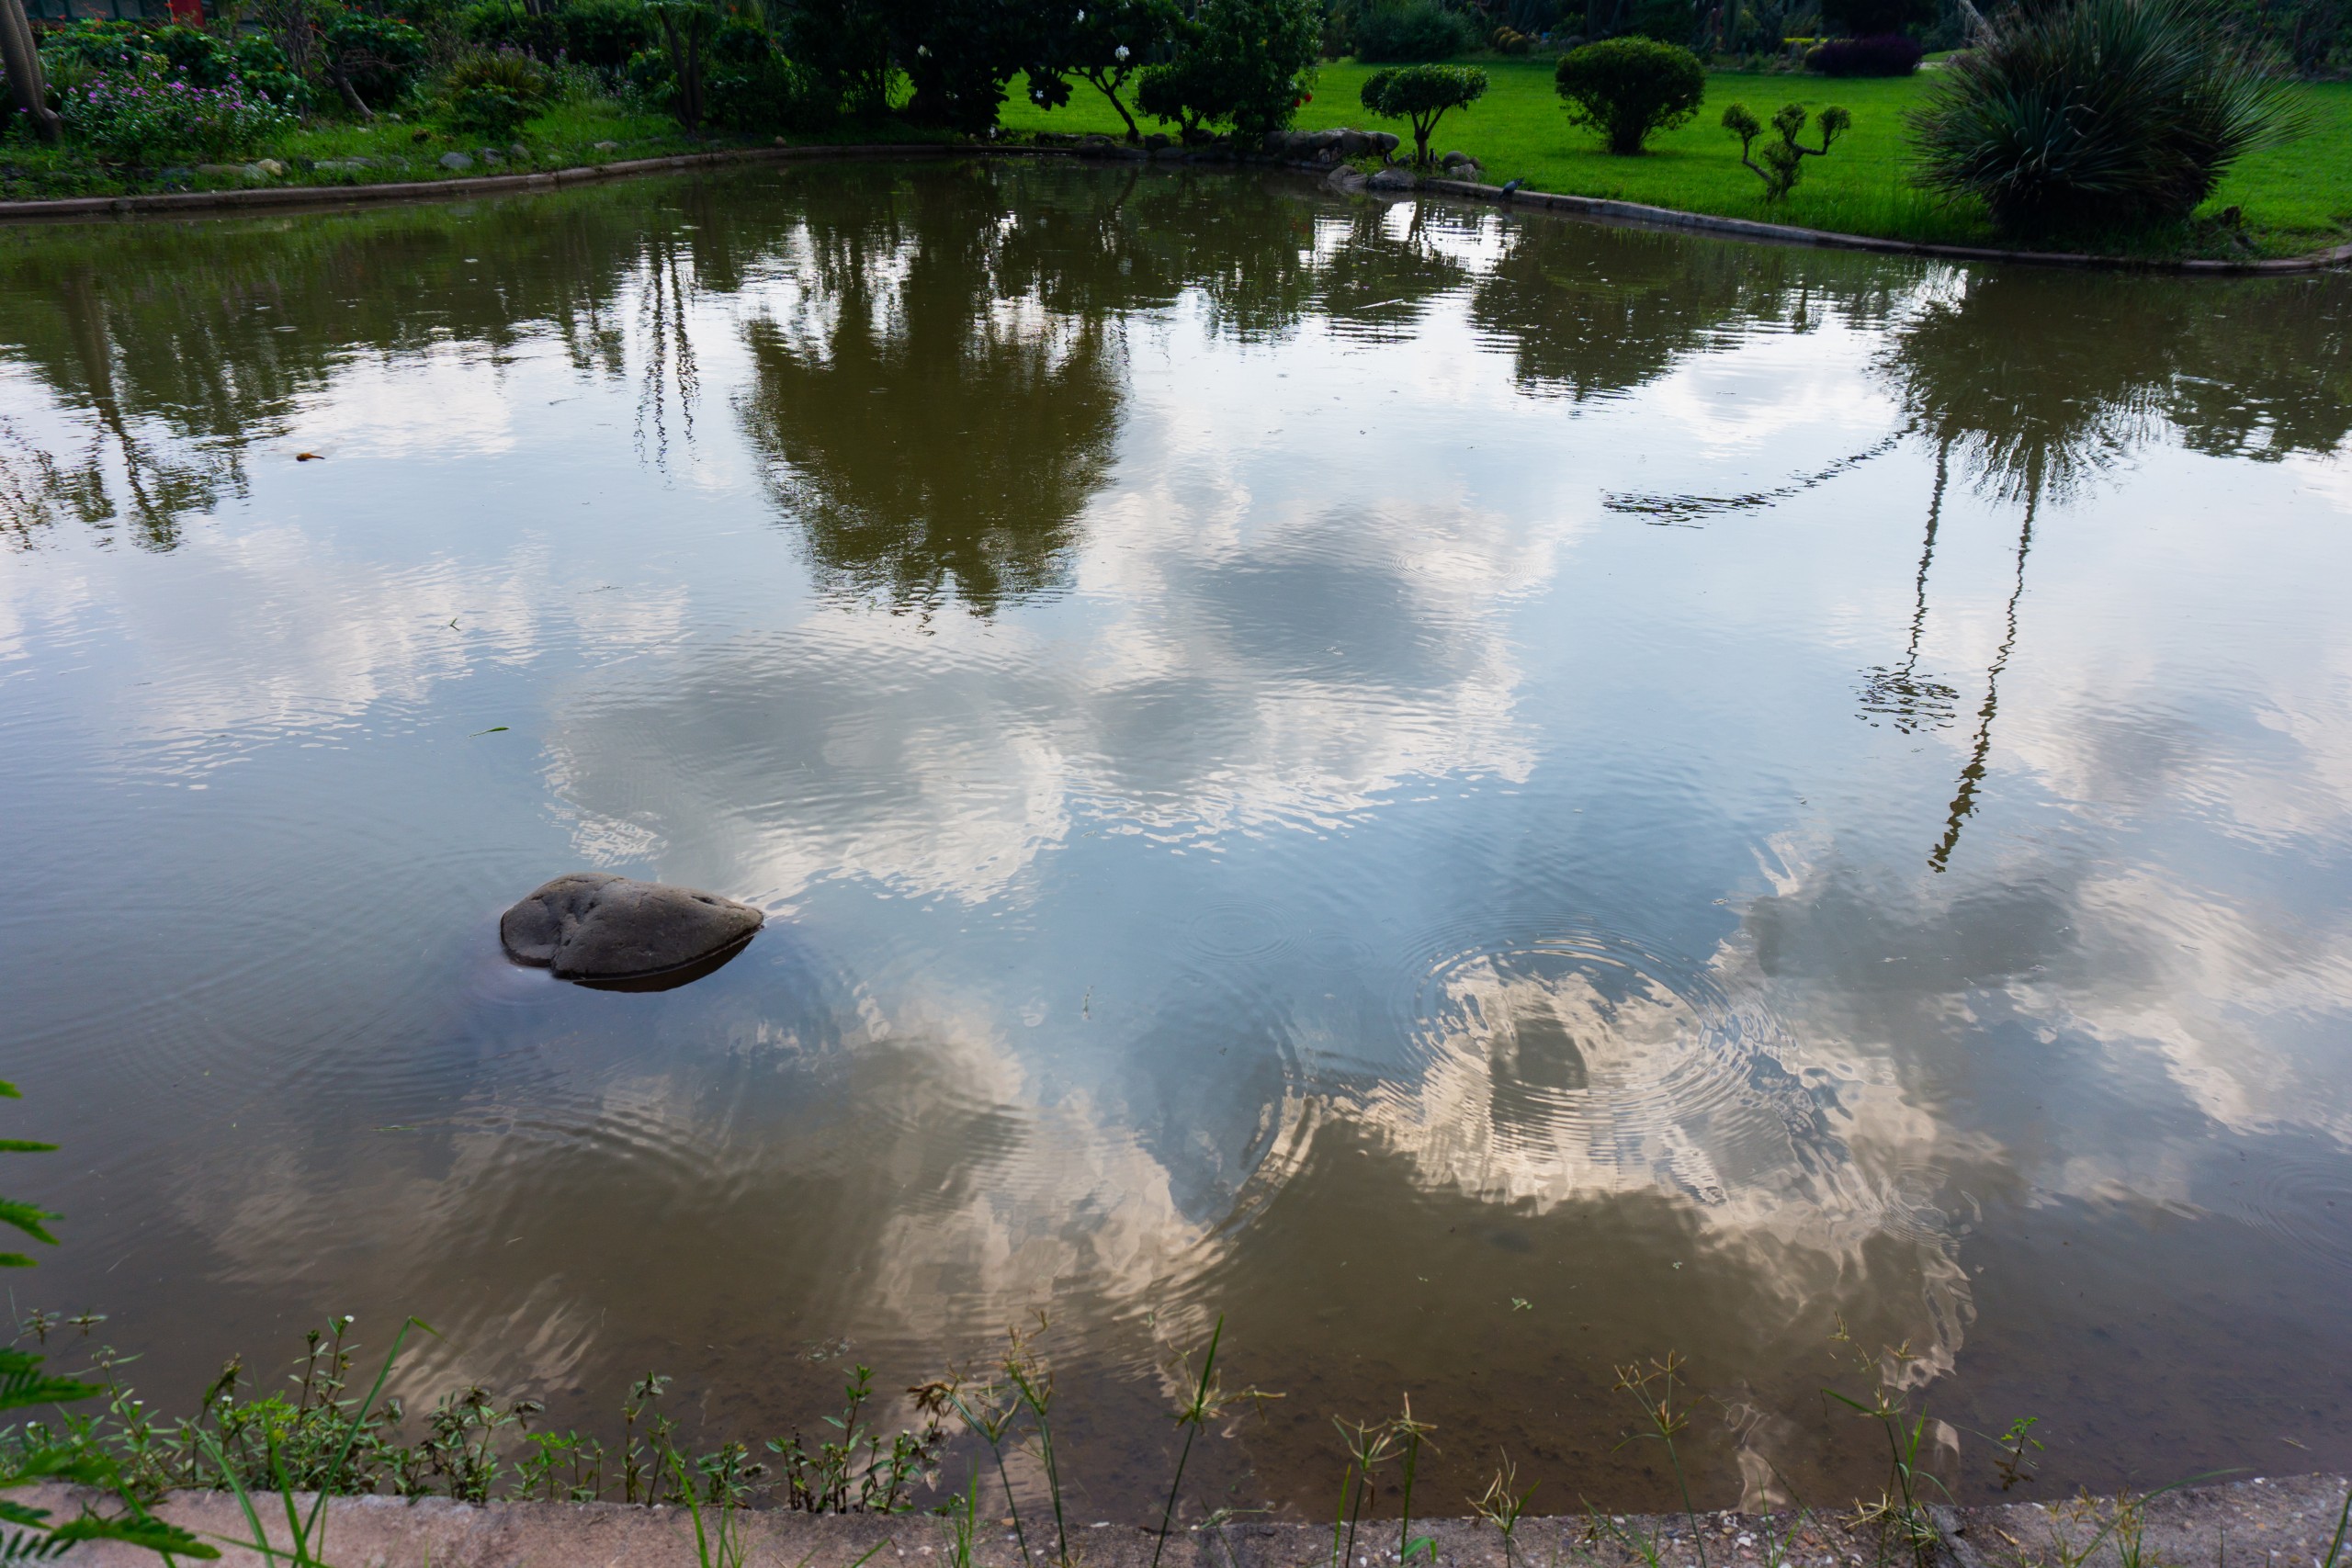 Reflection of cloudy sky in a pond